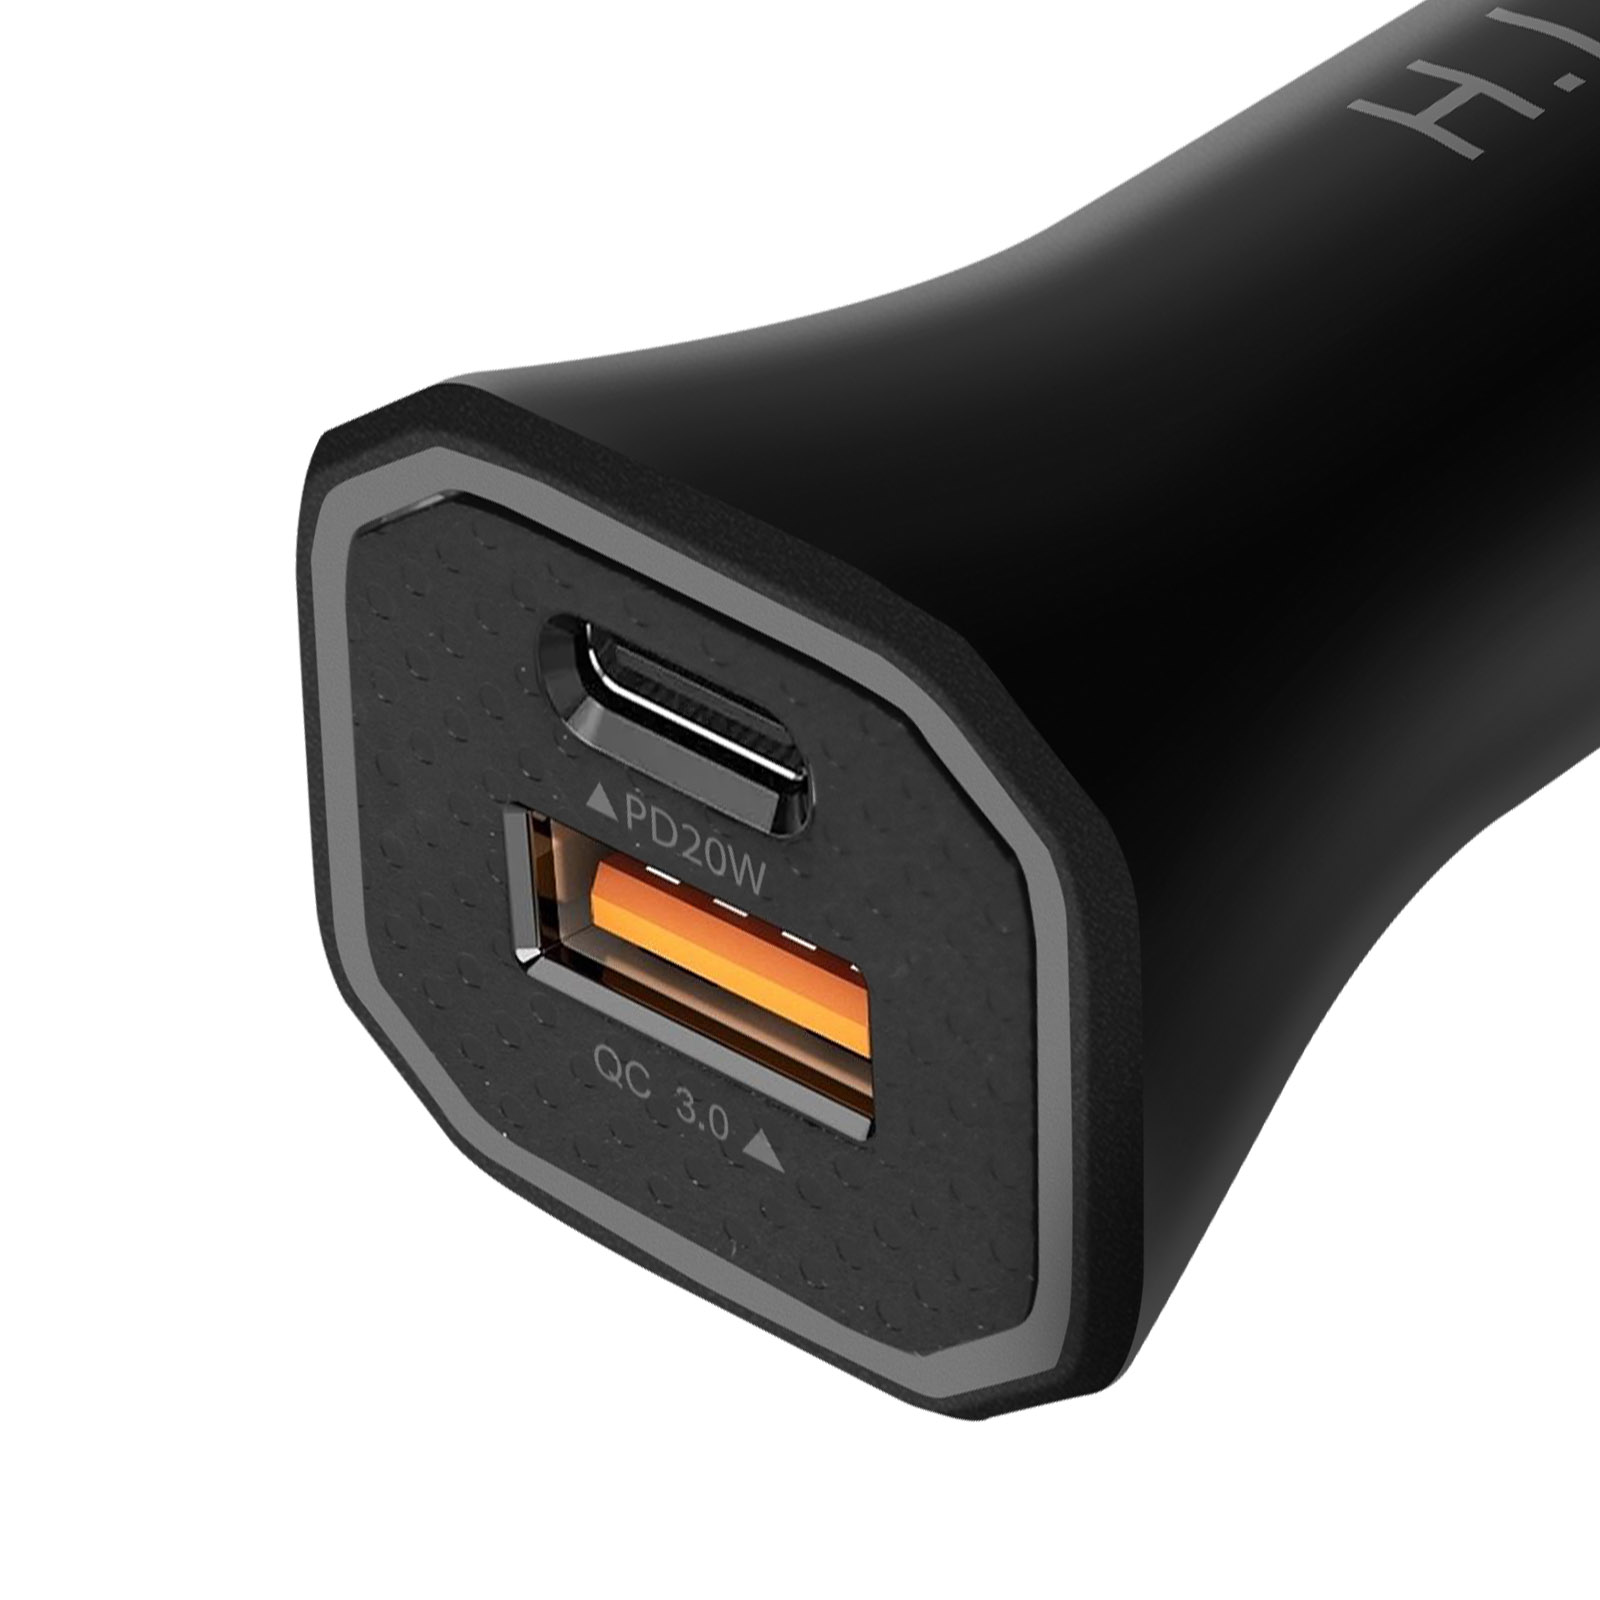 copy of Quick Charge 3.0 Chargeur Voiture 18W 2-Port USB Chargeur Allume  Cigar